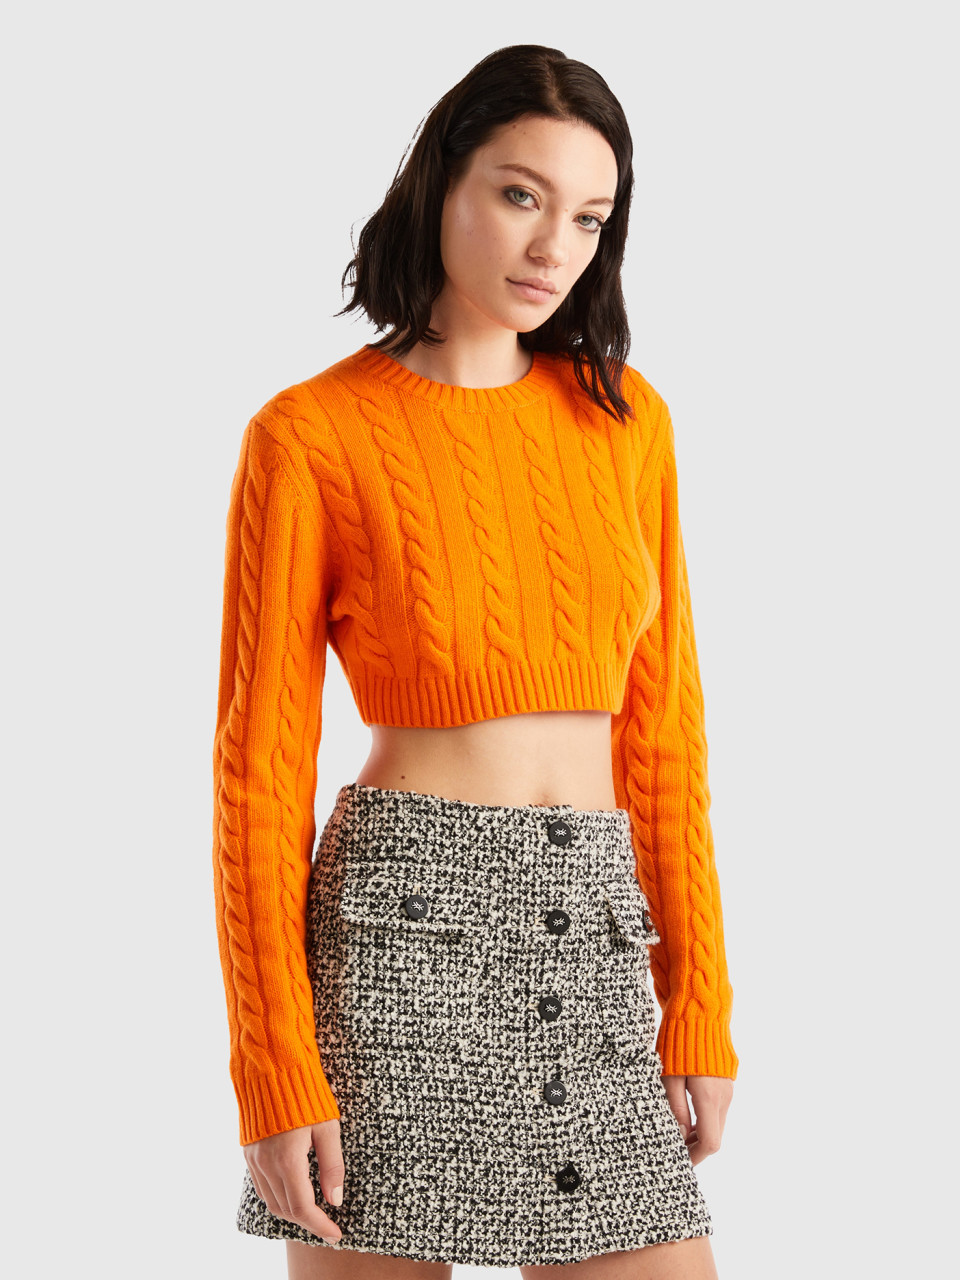 Benetton, Cropped Sweater With Cables, Orange, Women